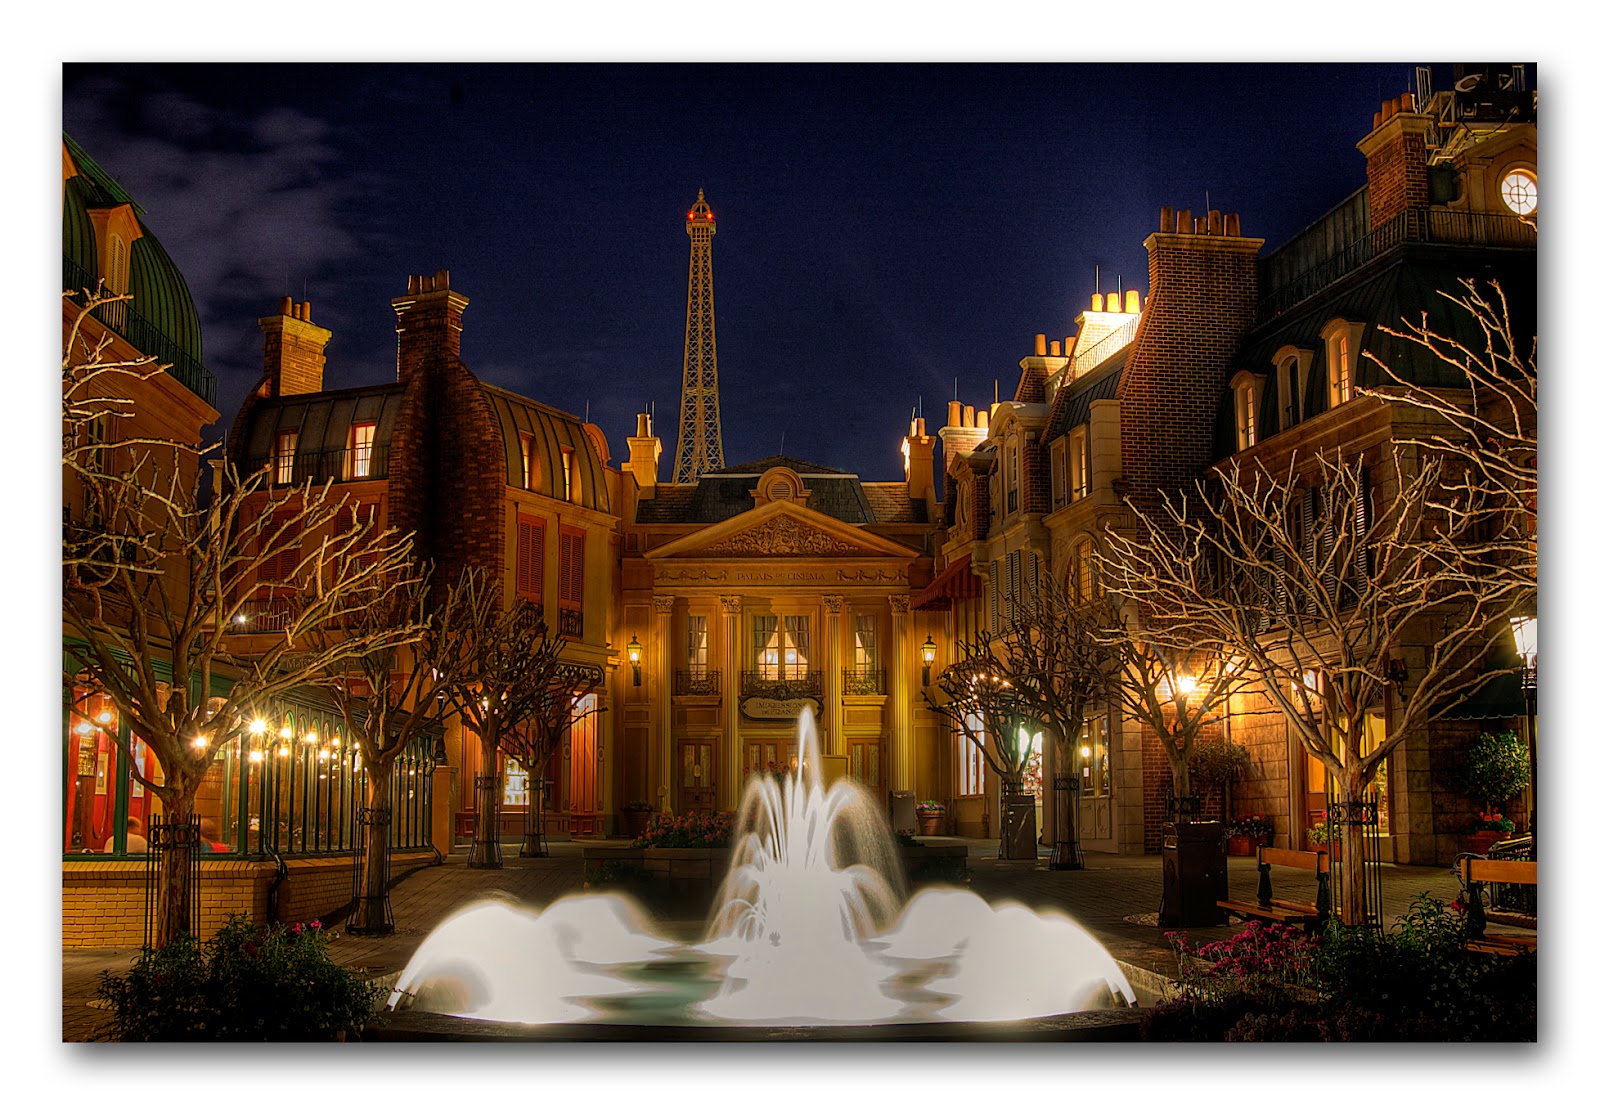 The Walt Disney World Picture of the Day: Epcot - France at Night